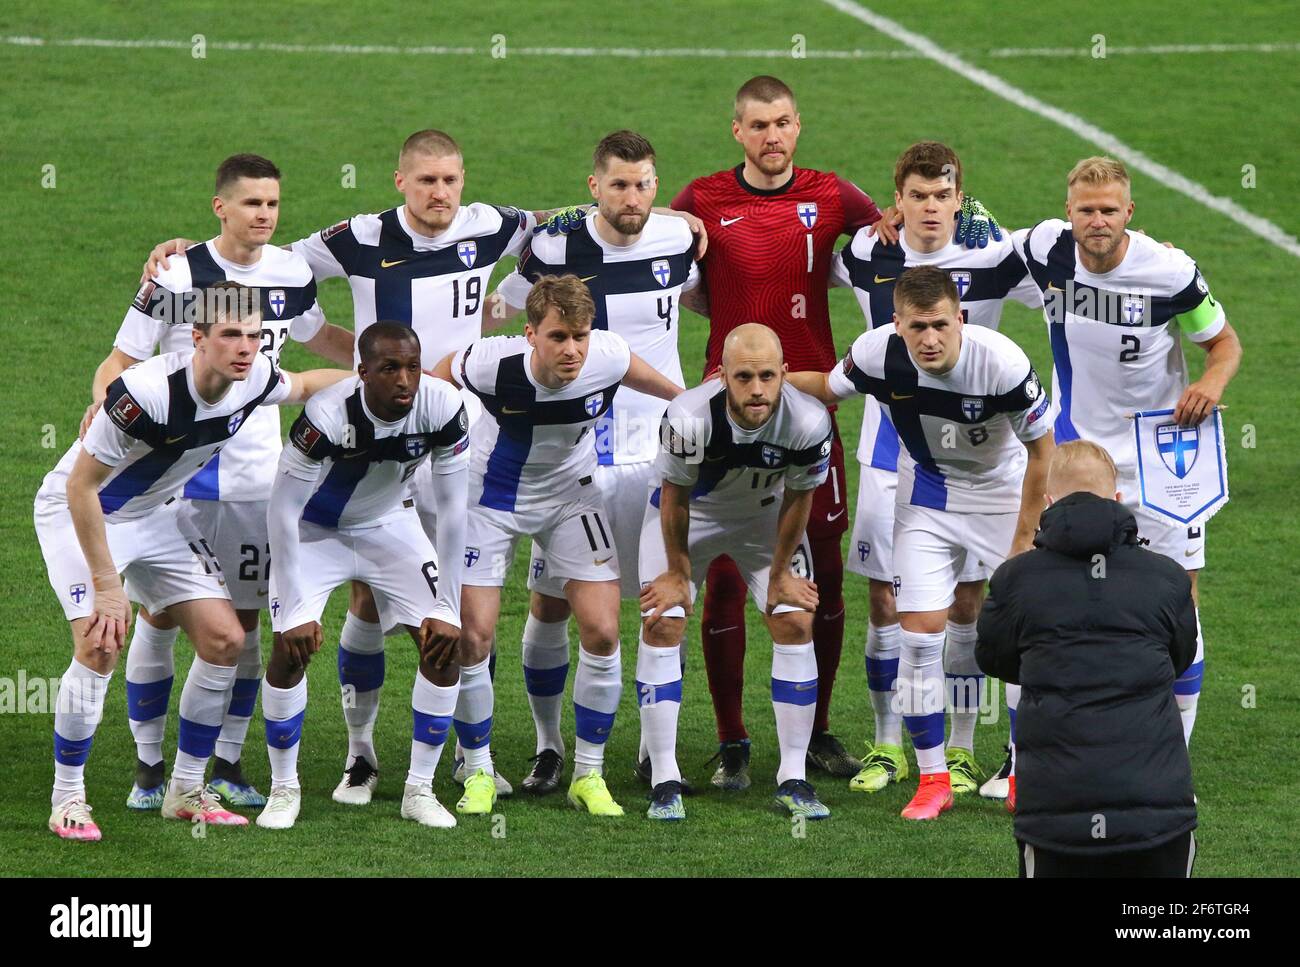 KYIV, UKRAINE - MARCH 28, 2021: Players of Finland National Team pose for a group photo before the FIFA World Cup 2022 Qualifying round game Ukraine v Finland at NSK Olimpiyskiy stadium in Kyiv Stock Photo